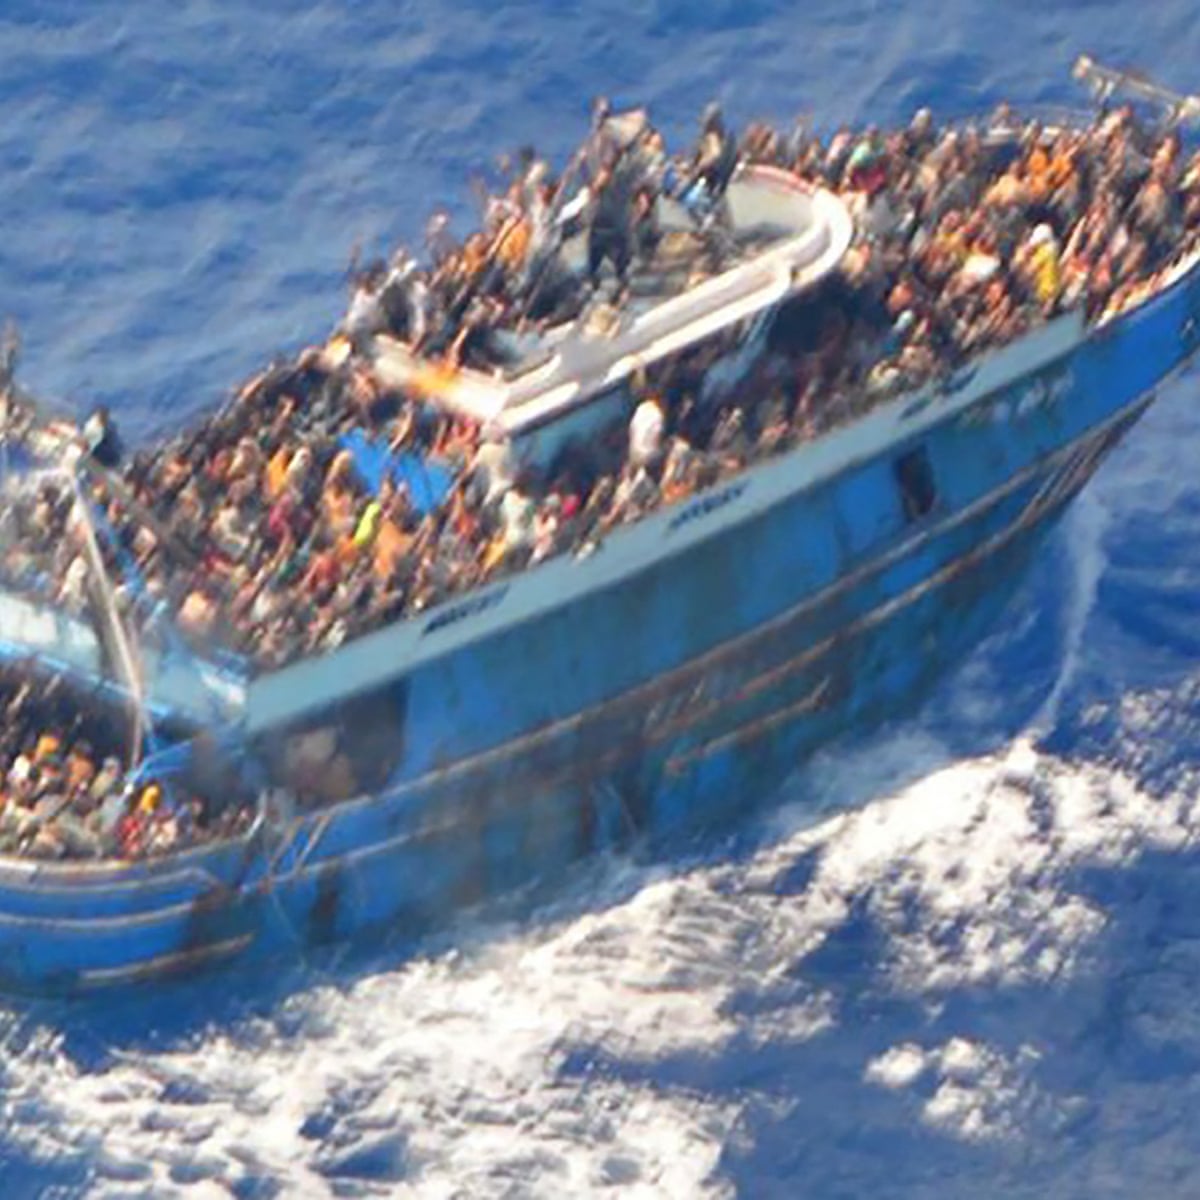 At least 78 people drown as refugee boat sinks off Greece